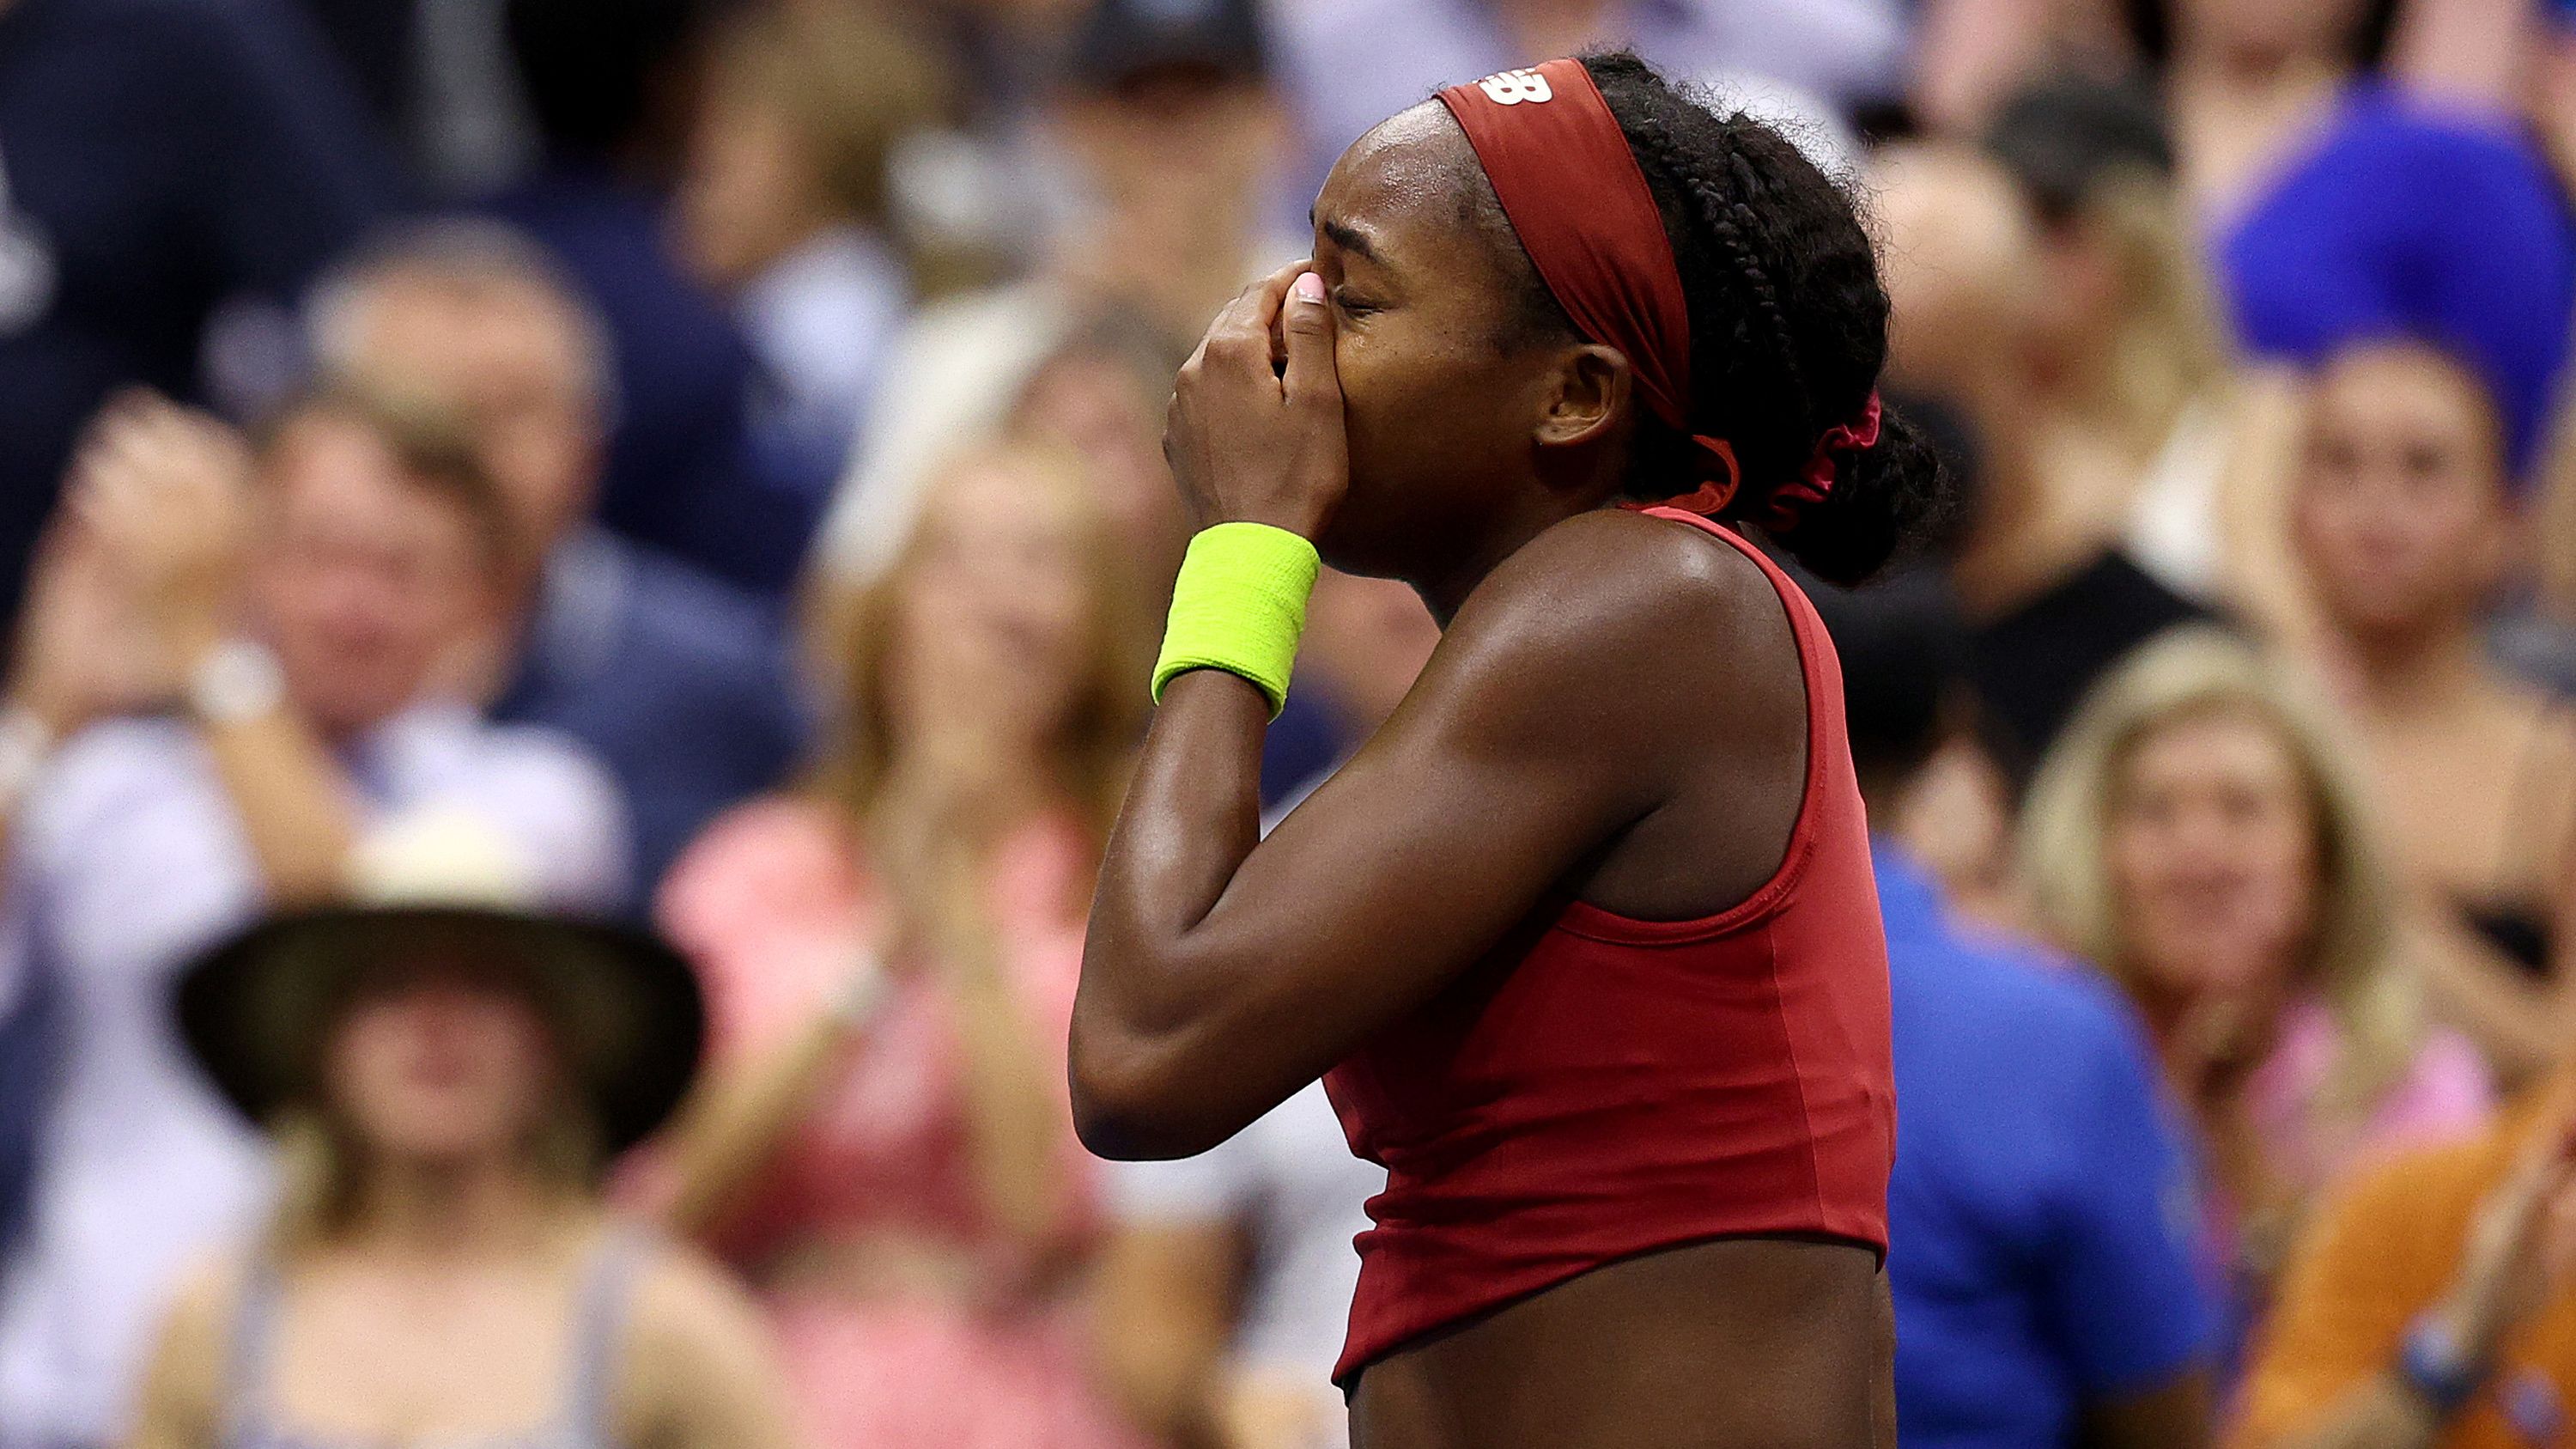 Coco Gauff of the United States celebrates after defeating Aryna Sabalenka of Belarus in their Women&#x27;s Singles Final match on Day Thirteen of the 2023 US Open at the USTA Billie Jean King National Tennis Center on September 09, 2023 in the Flushing neighborhood of the Queens borough of New York City. (Photo by Elsa/Getty Images)